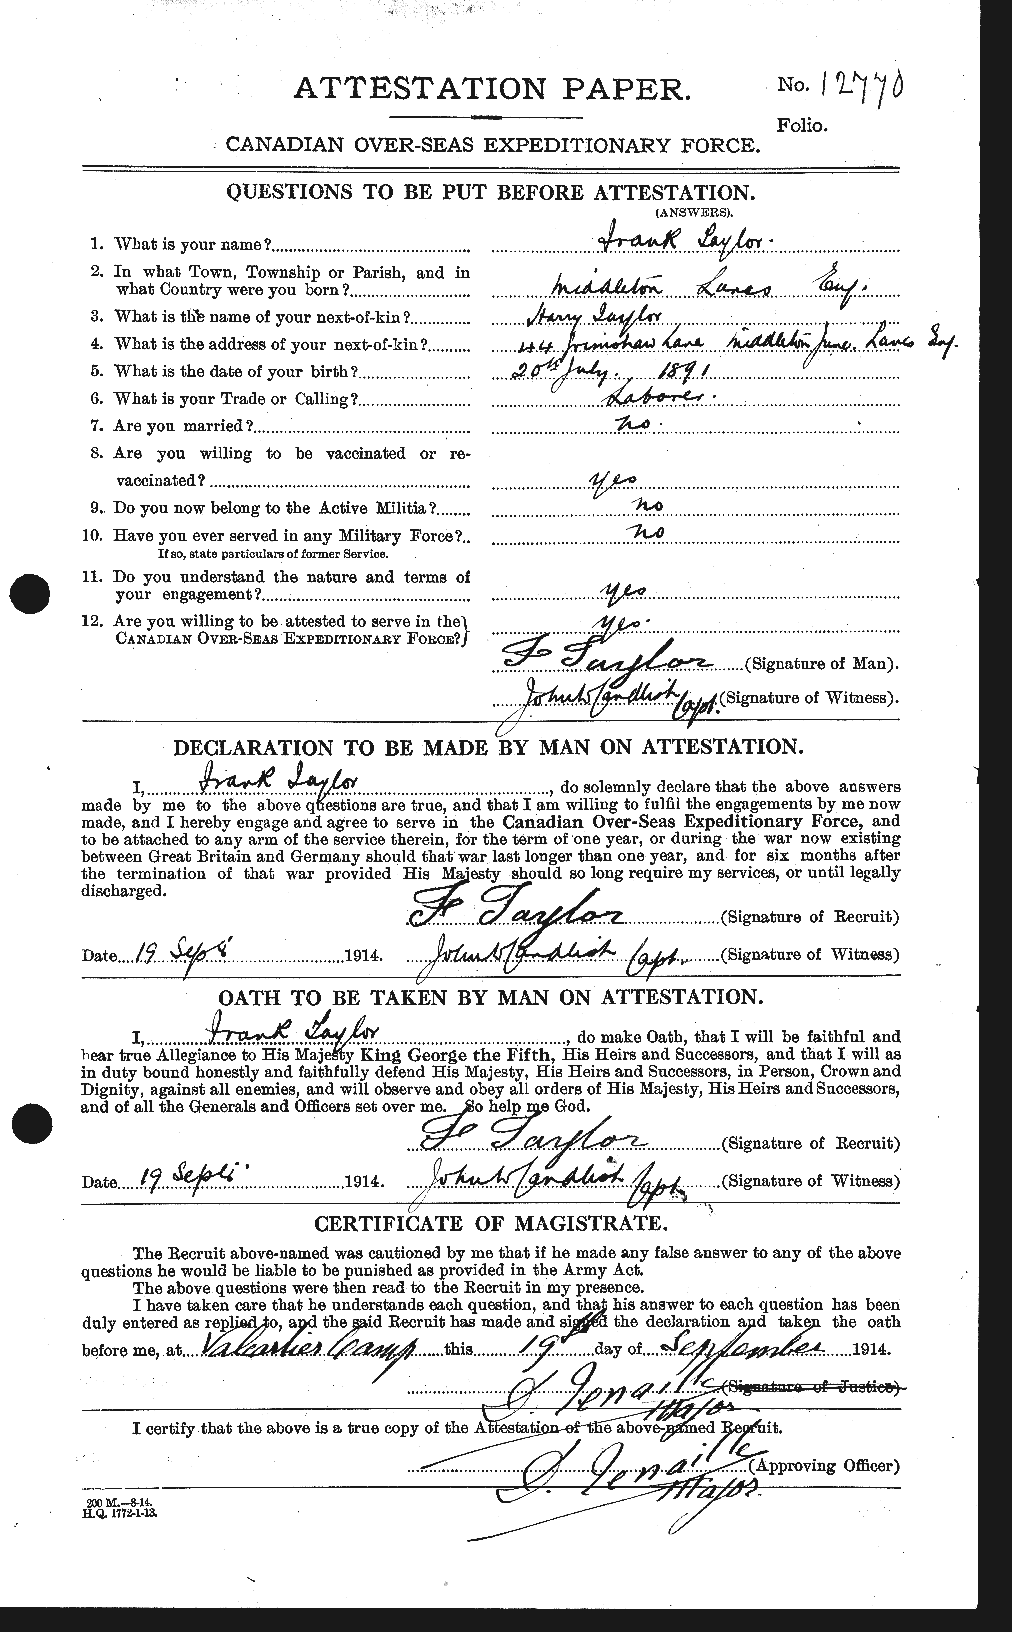 Personnel Records of the First World War - CEF 625699a